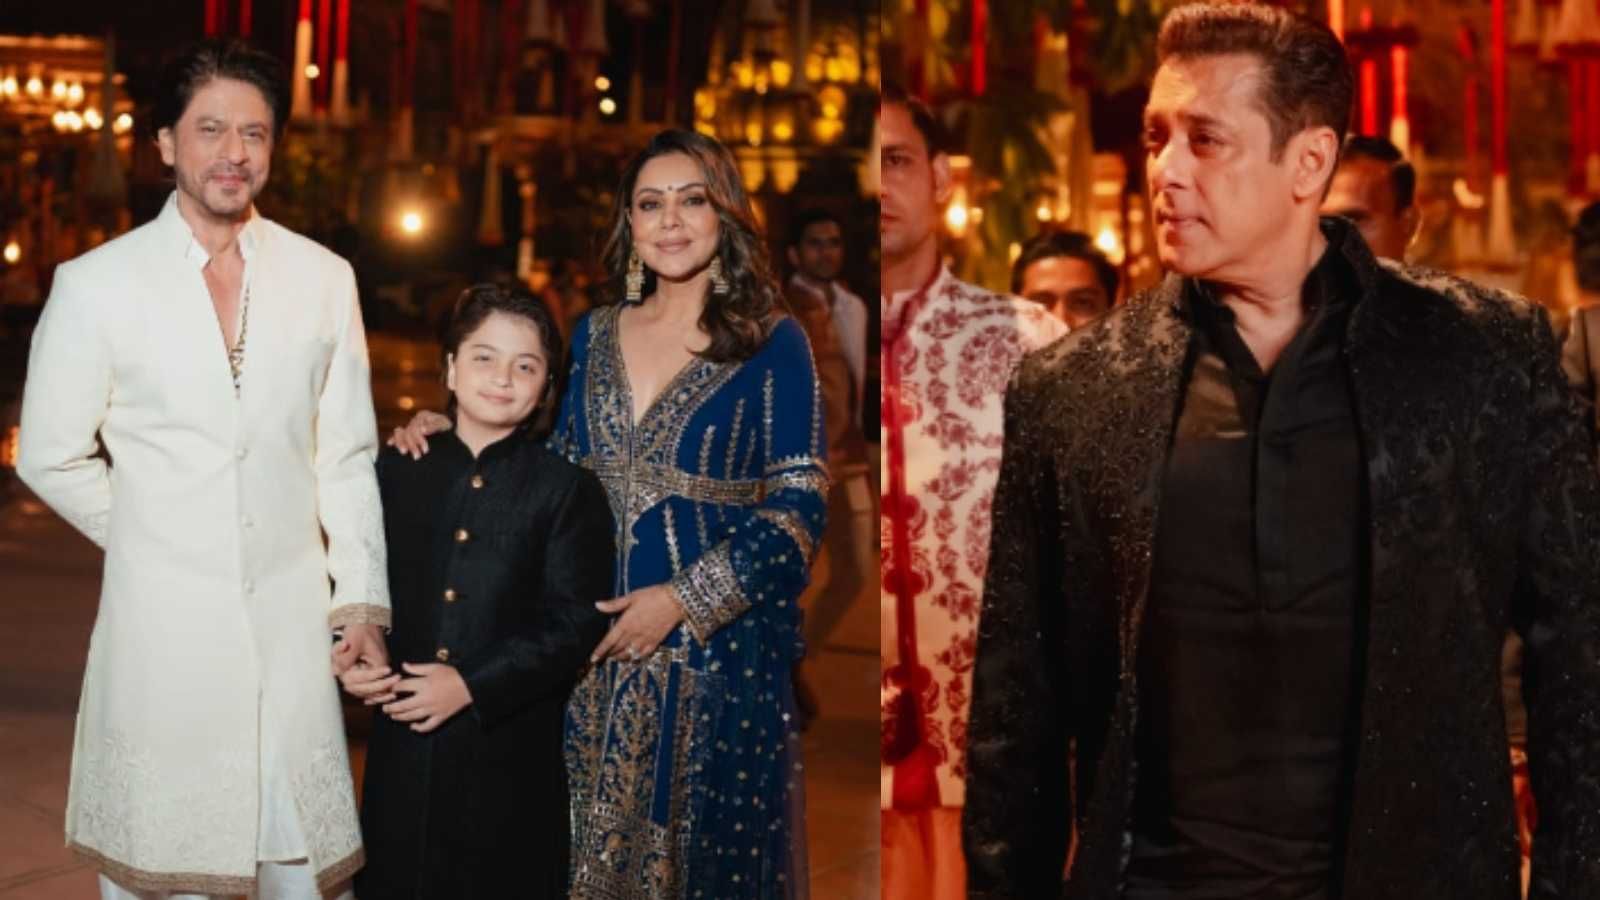 Latest pictures from the Ambani pre-wedding bash